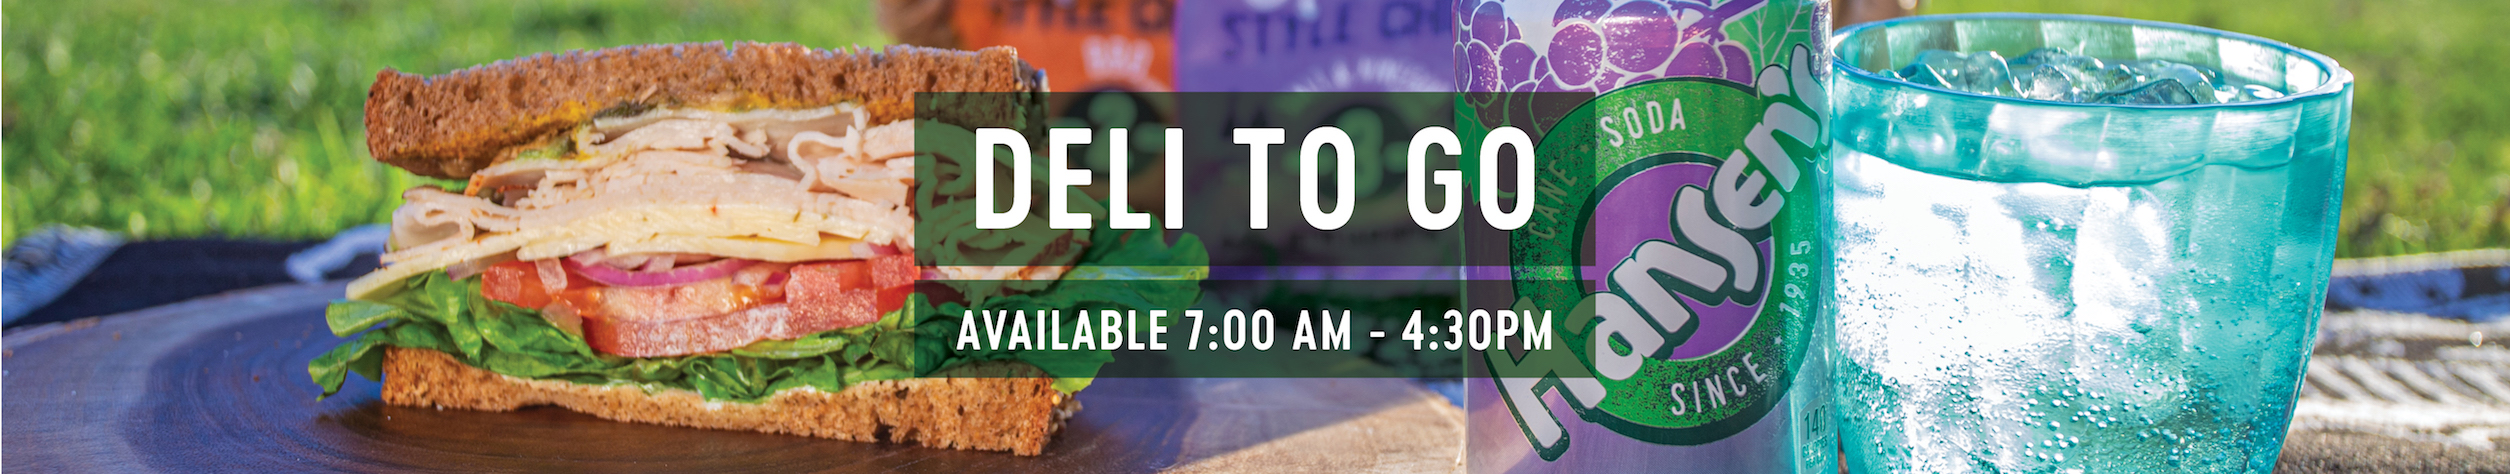 SPROUTS DELI TO GO AVAILABLE 7AM - 4:30PM